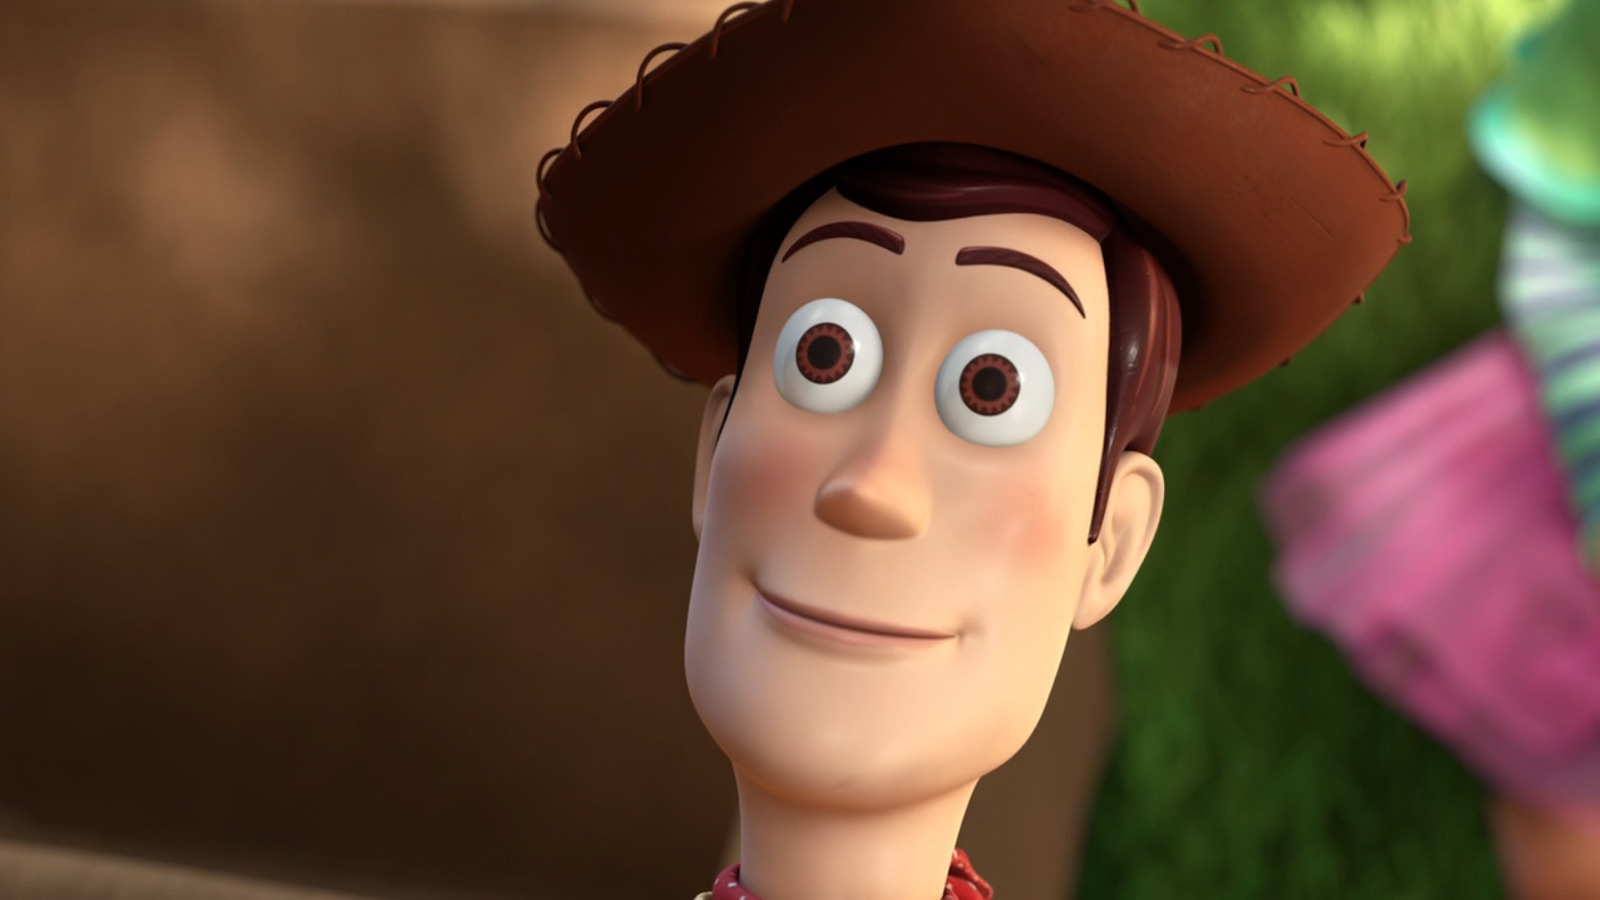 10 Dark Implications Of Toy Story That Everyone Missed As A Kid